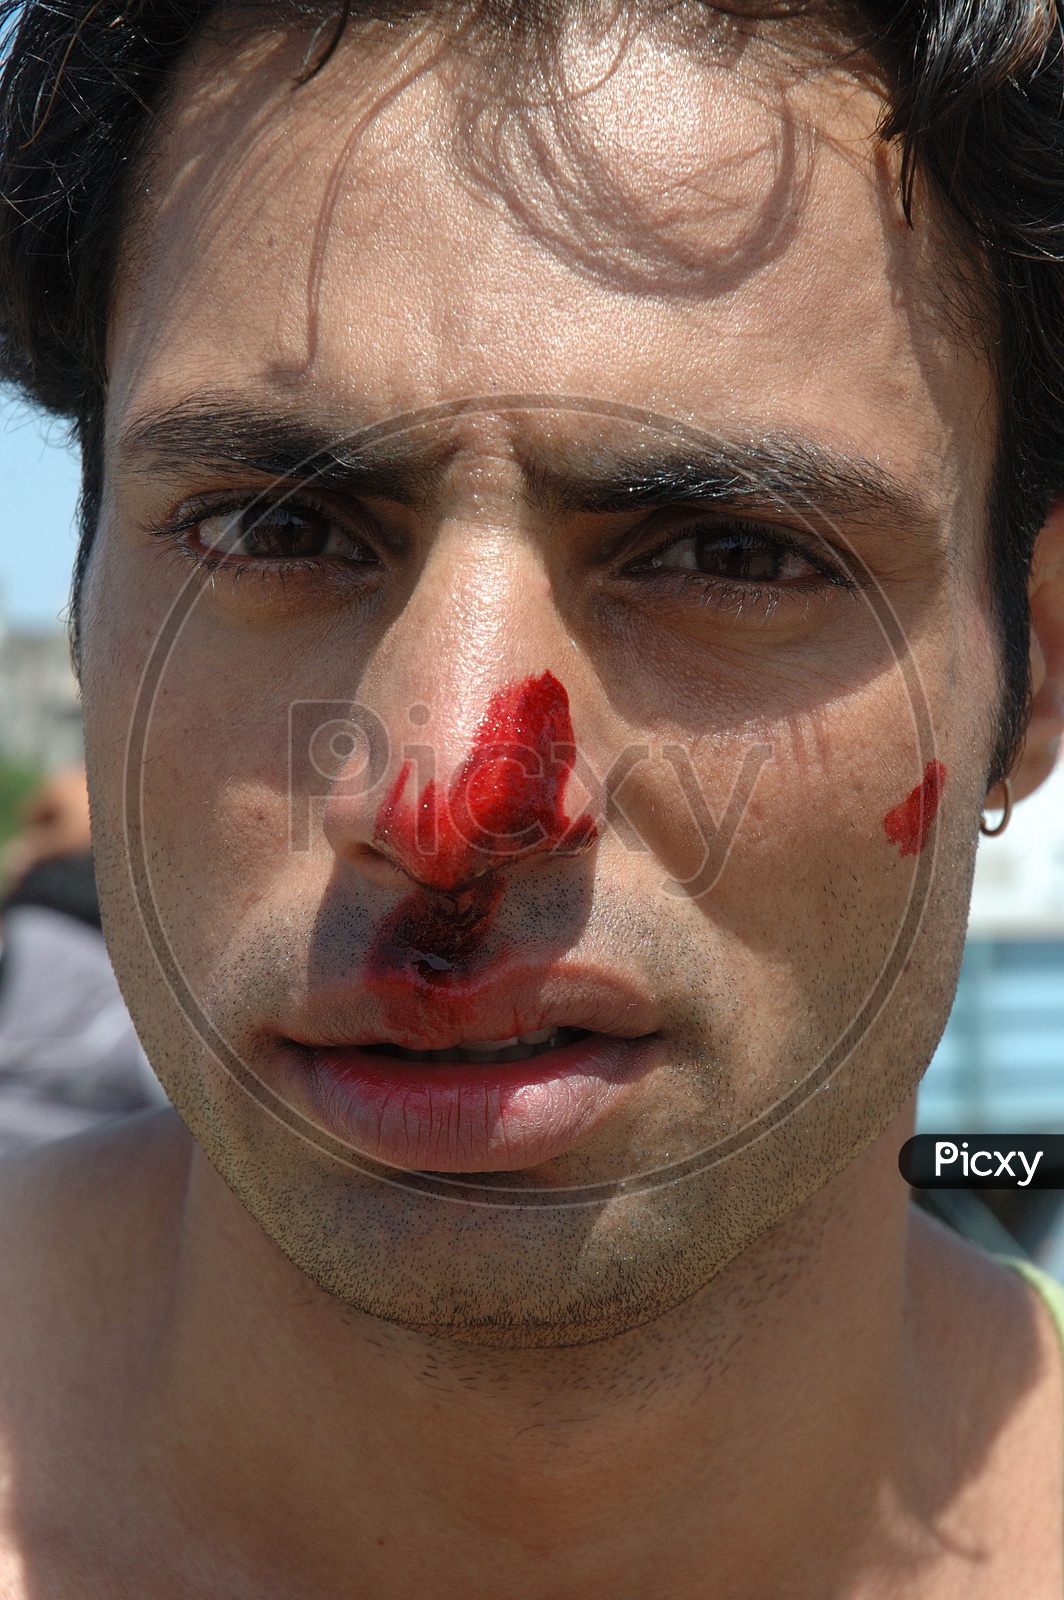 Man With Blood Stains on Face